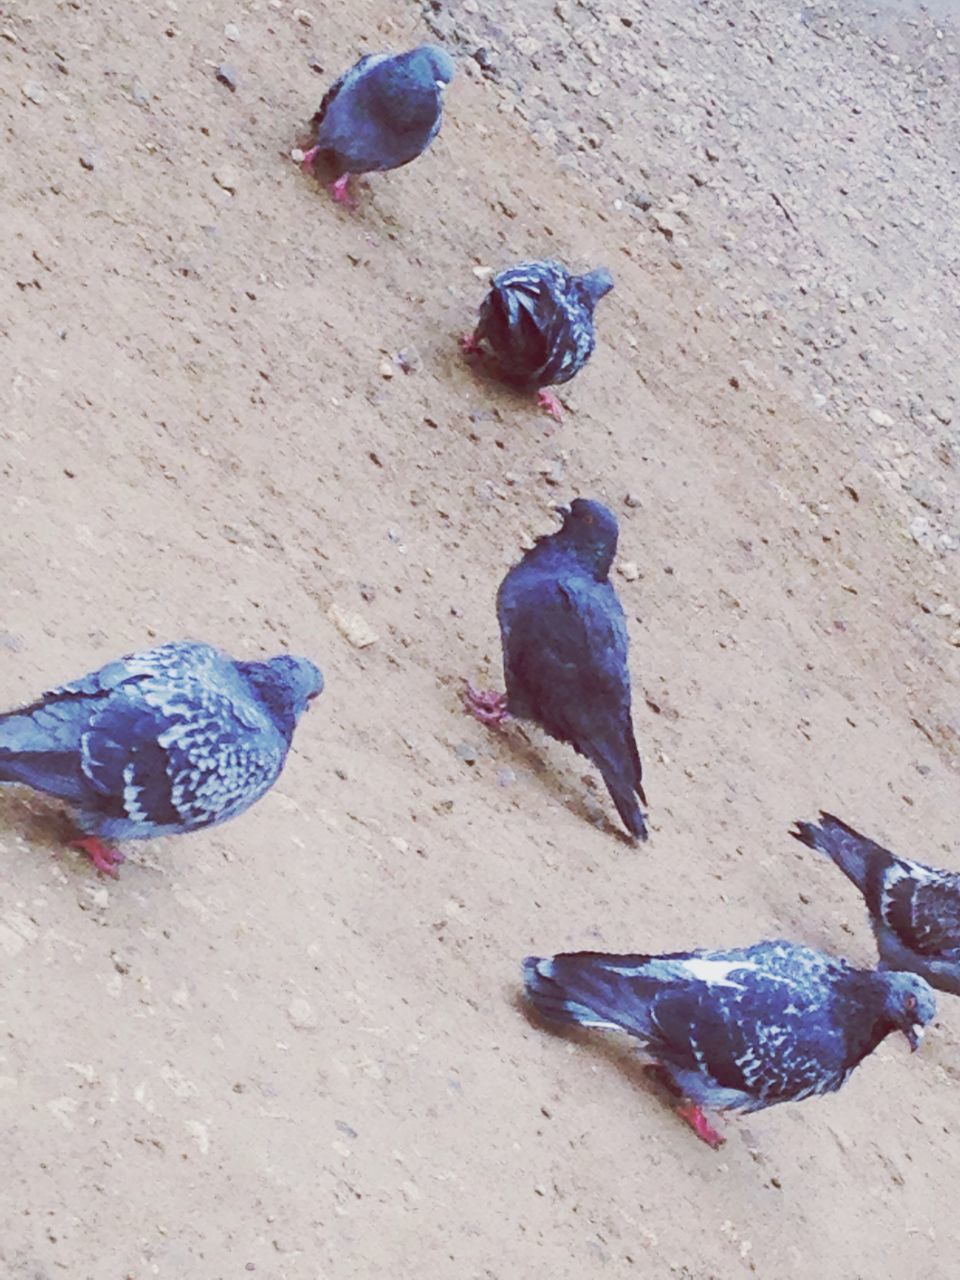 animal themes, animals in the wild, wildlife, bird, one animal, pigeon, high angle view, peacock, two animals, sand, outdoors, day, three animals, blue, nature, dead animal, beach, multi colored, full length, zoology